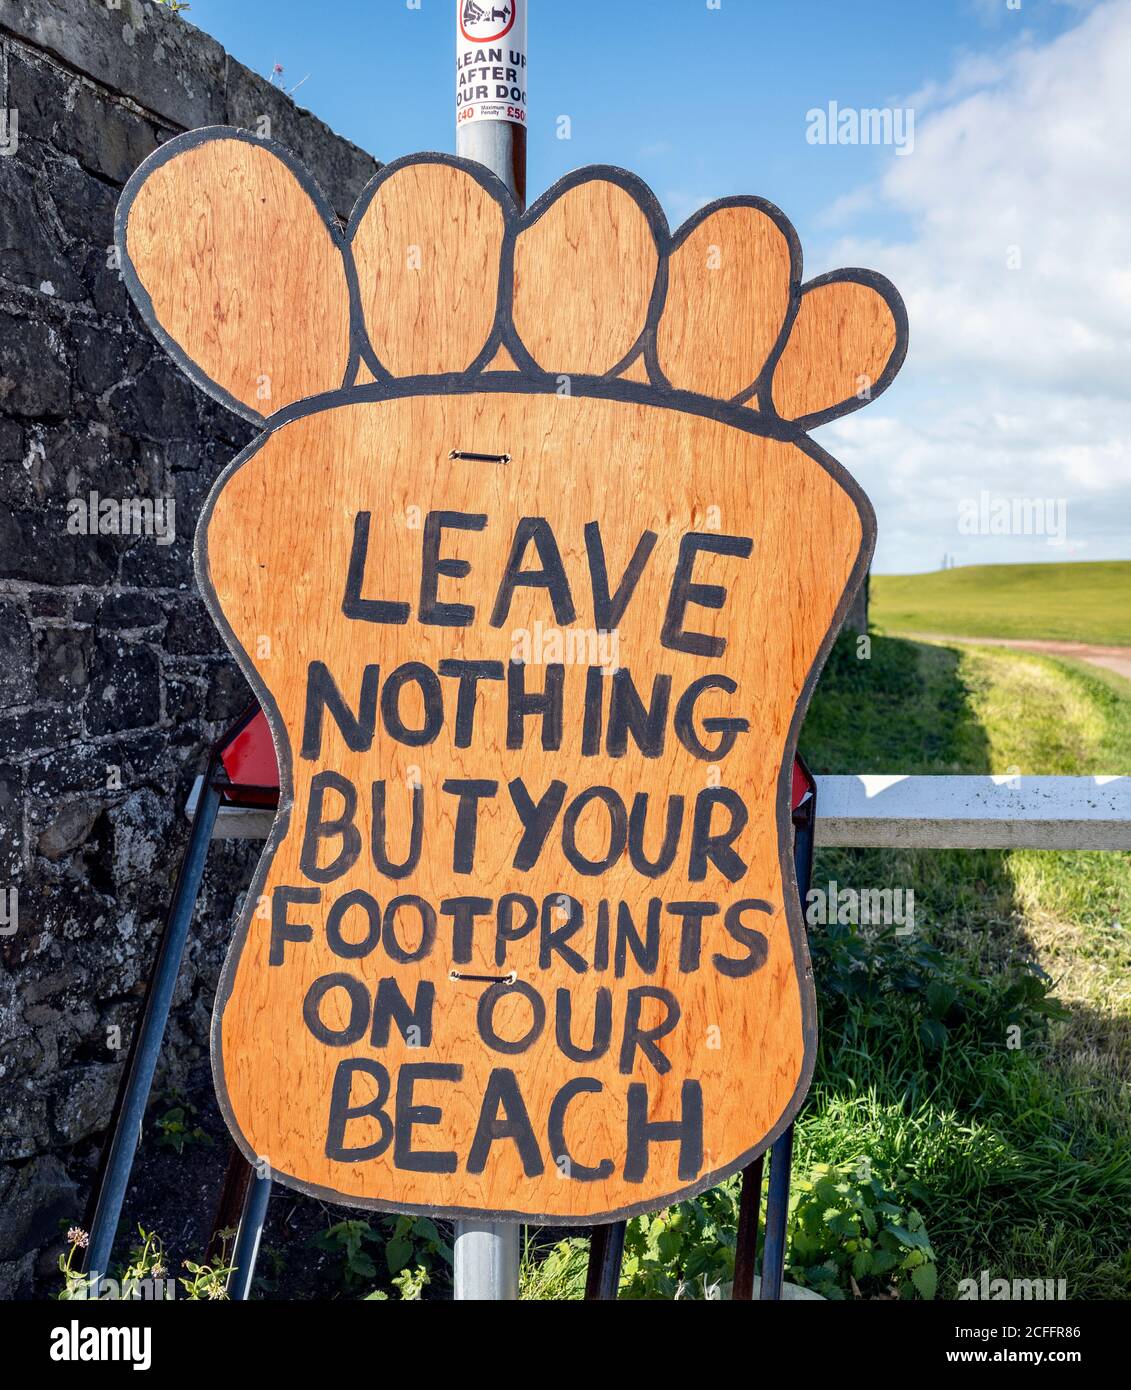 Leave Nothing But Your Footprints On Our Beach sign, North Berwick, East Lothian, Scotland, UK. Stock Photo